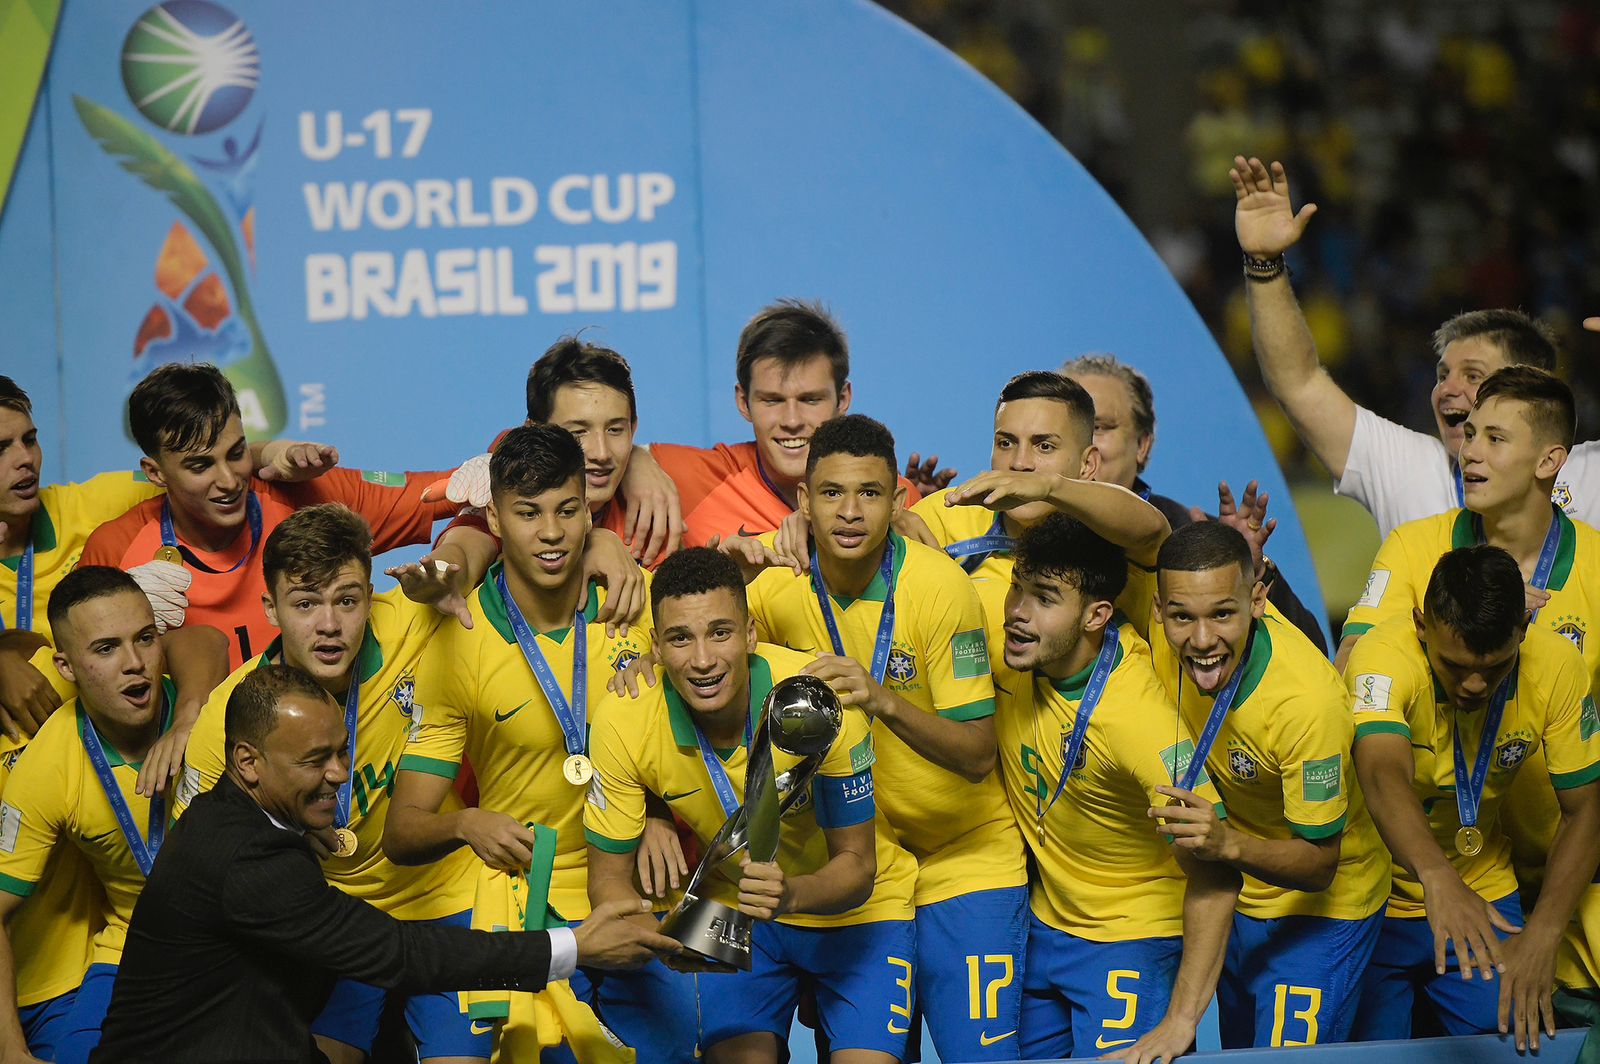 As captain, Henri lifts the 2019 FIFA U-17 World Cup for Brazil. (Courtesy North Texas SC)